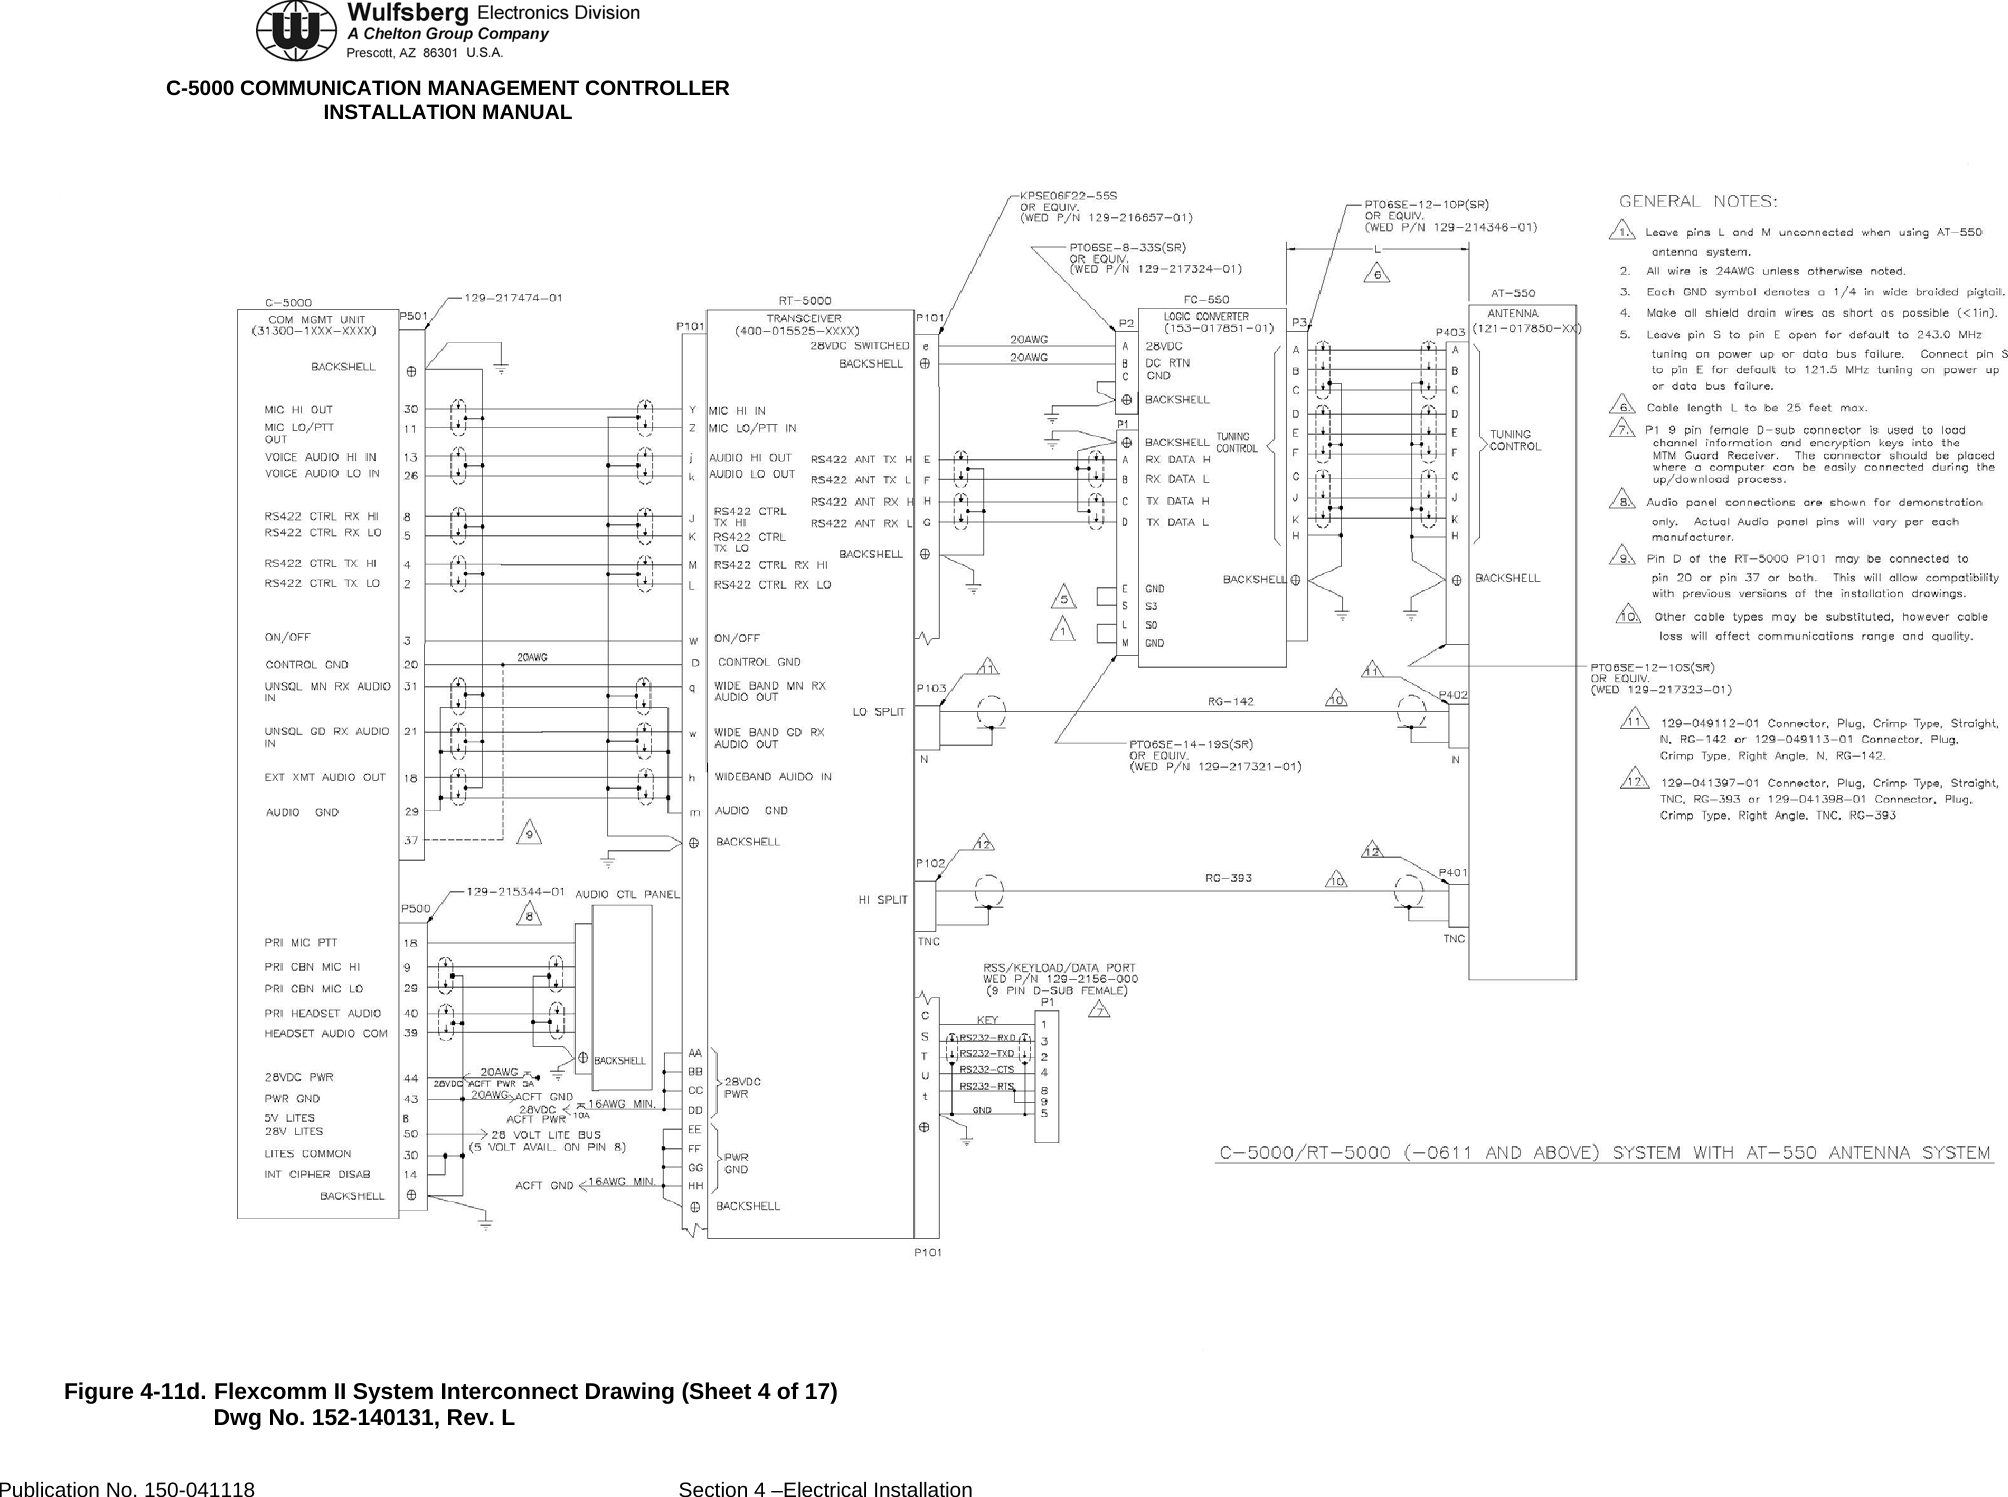  C-5000 COMMUNICATION MANAGEMENT CONTROLLER INSTALLATION MANUAL  Figure 4-11d. Flexcomm II System Interconnect Drawing (Sheet 4 of 17) Dwg No. 152-140131, Rev. L Publication No. 150-041118  Section 4 –Electrical Installation 